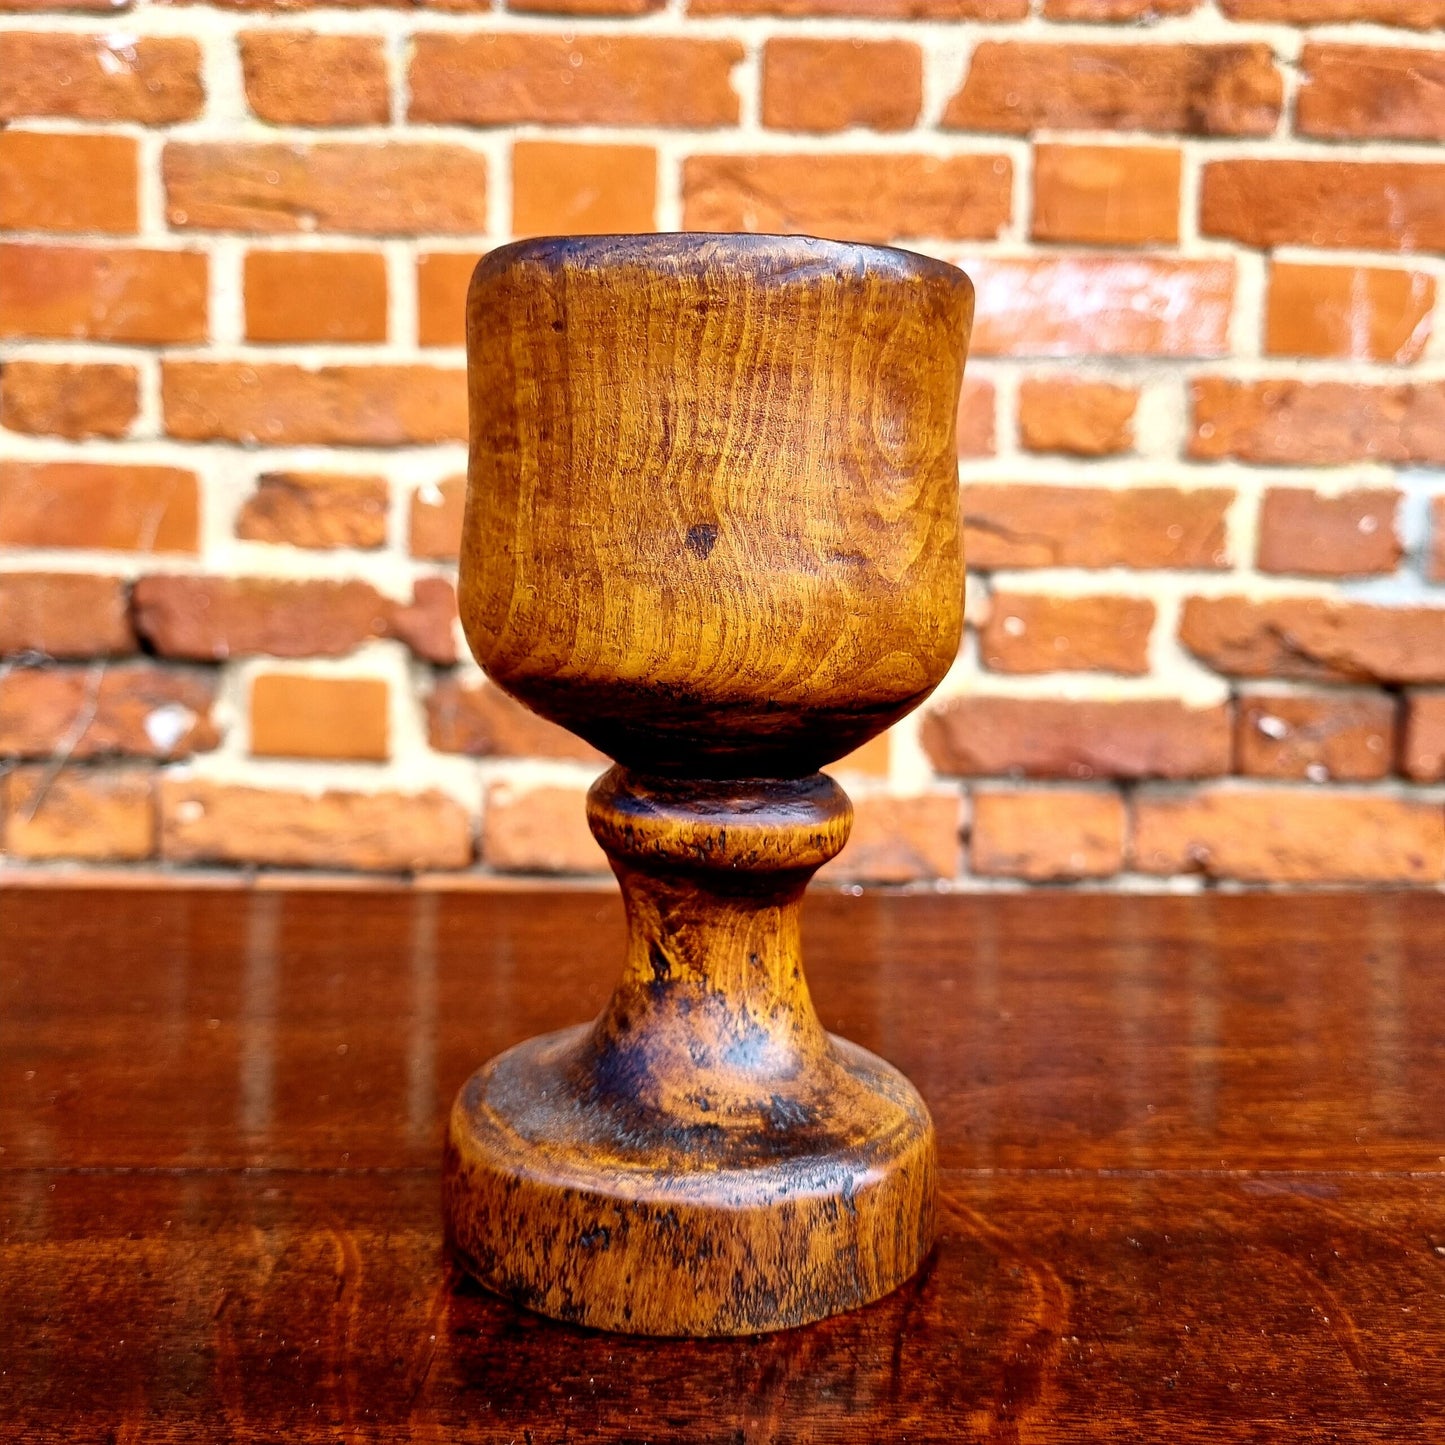 Late 18th Century / Early 19th Century English Antique Treen Beechwood Goblet